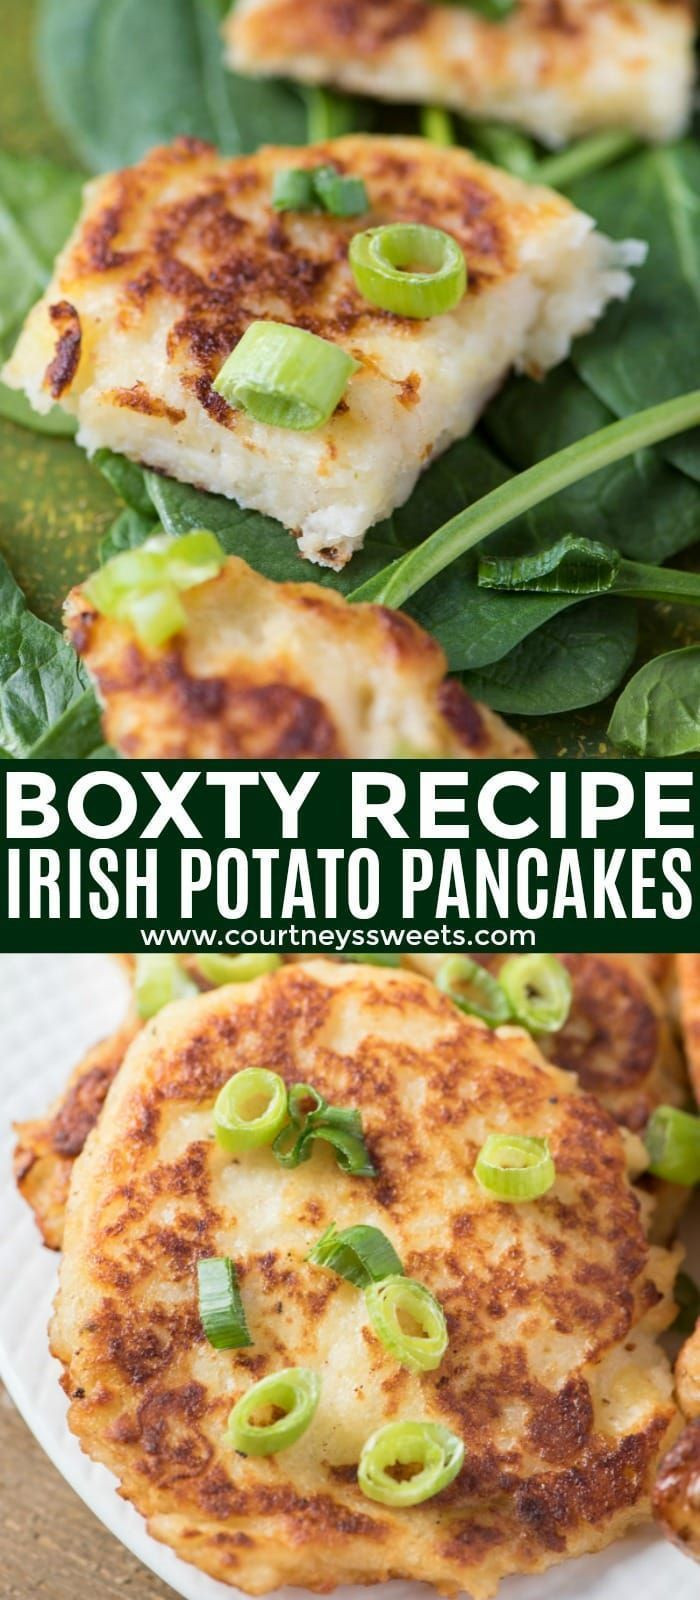 Kid Friendly Irish Recipes
 This boxty recipe is kid friendly for St Patrick s Day We